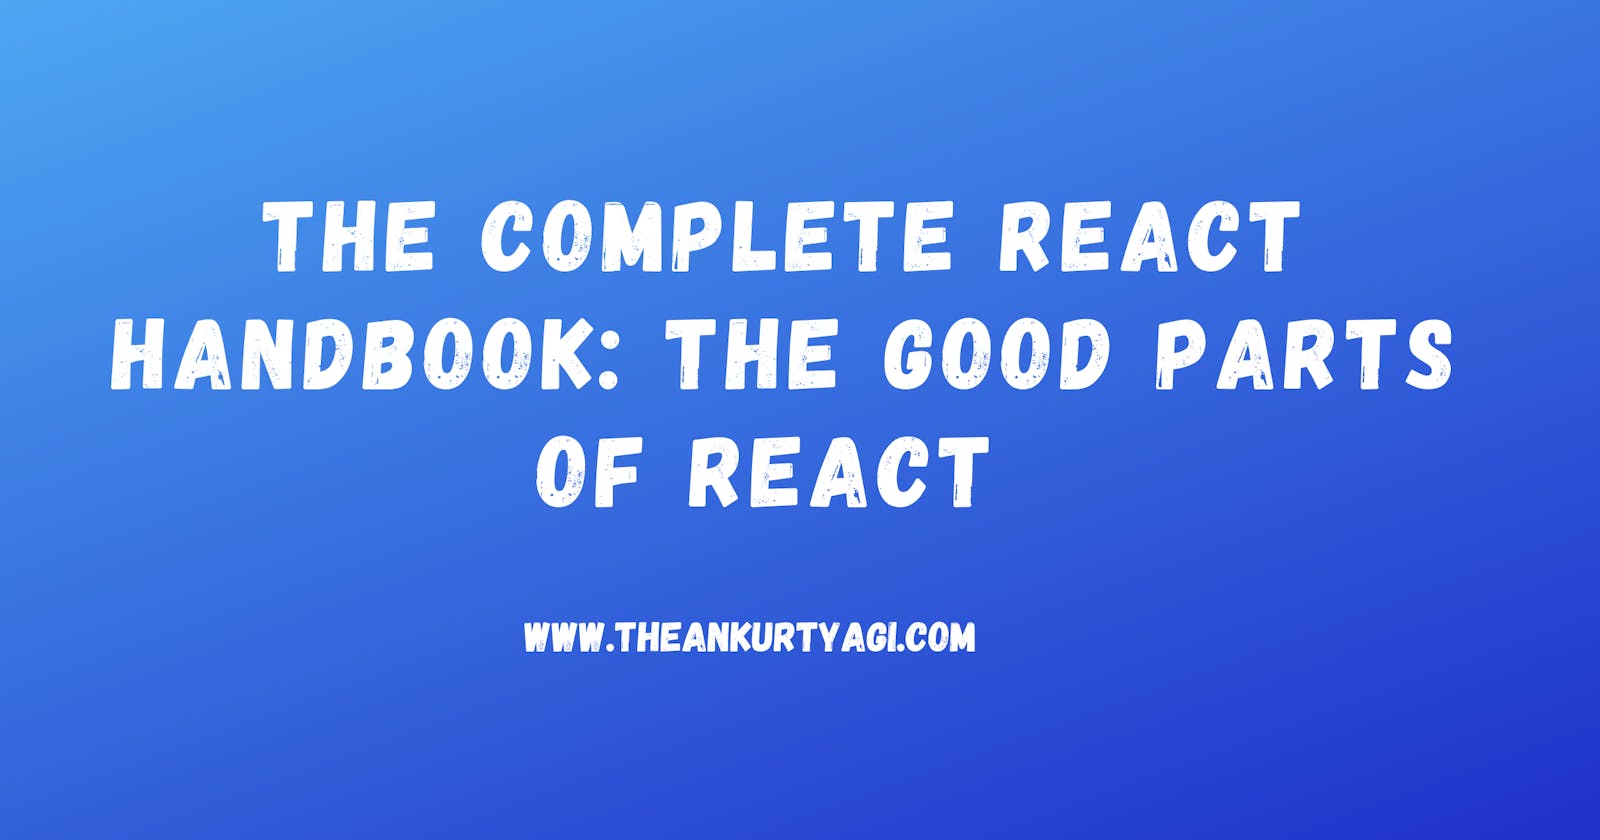 The Complete React Handbook: The Good Parts of React